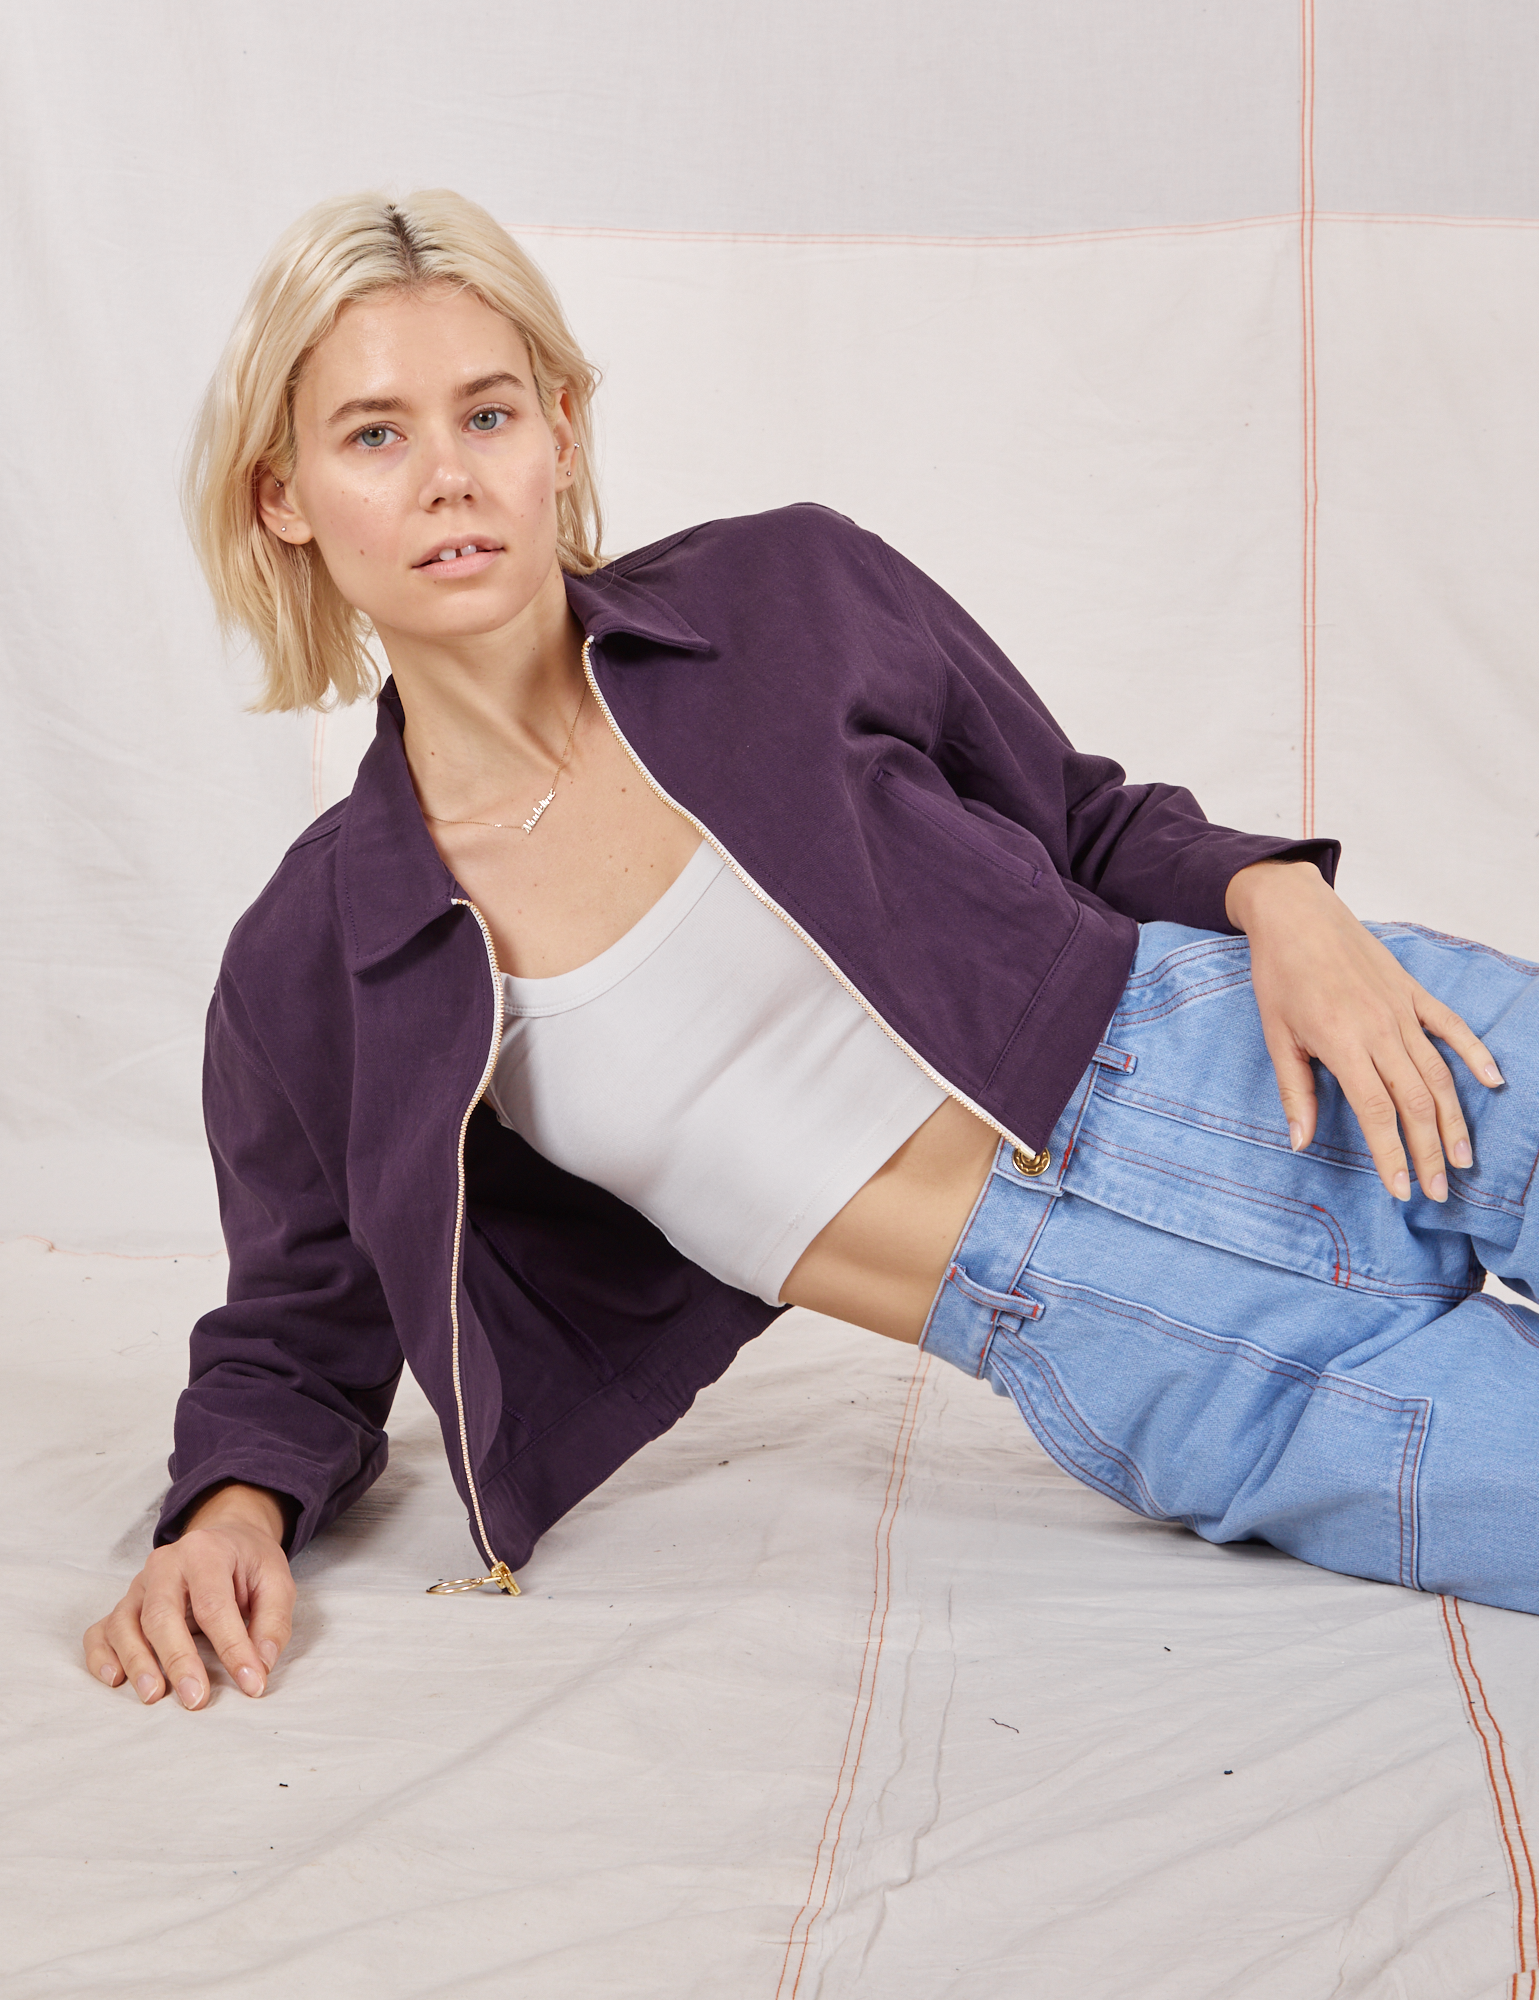 Madeline is wearing Ricky Jacket in Nebula Purple and vintage tee off-white Cropped Tank Top